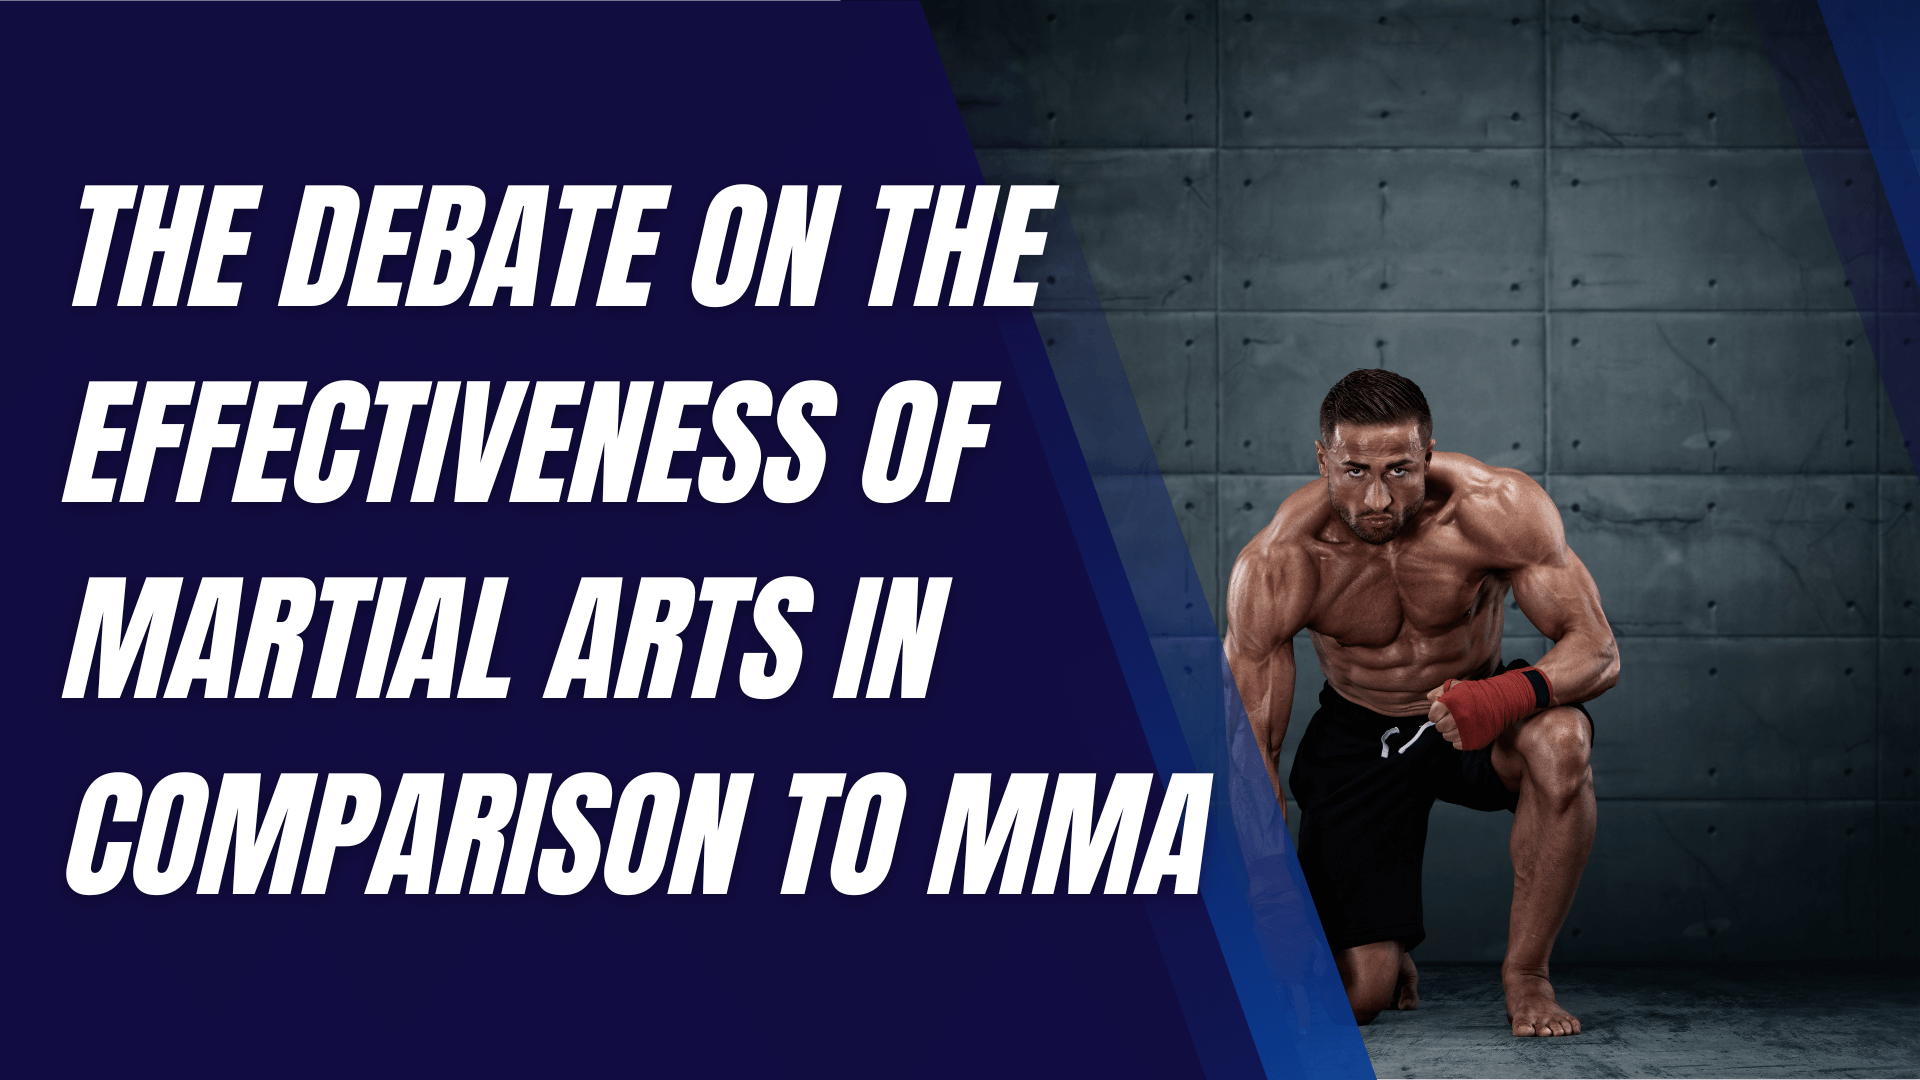 The Debate on the Effectiveness of Martial Arts in Comparison to MMA